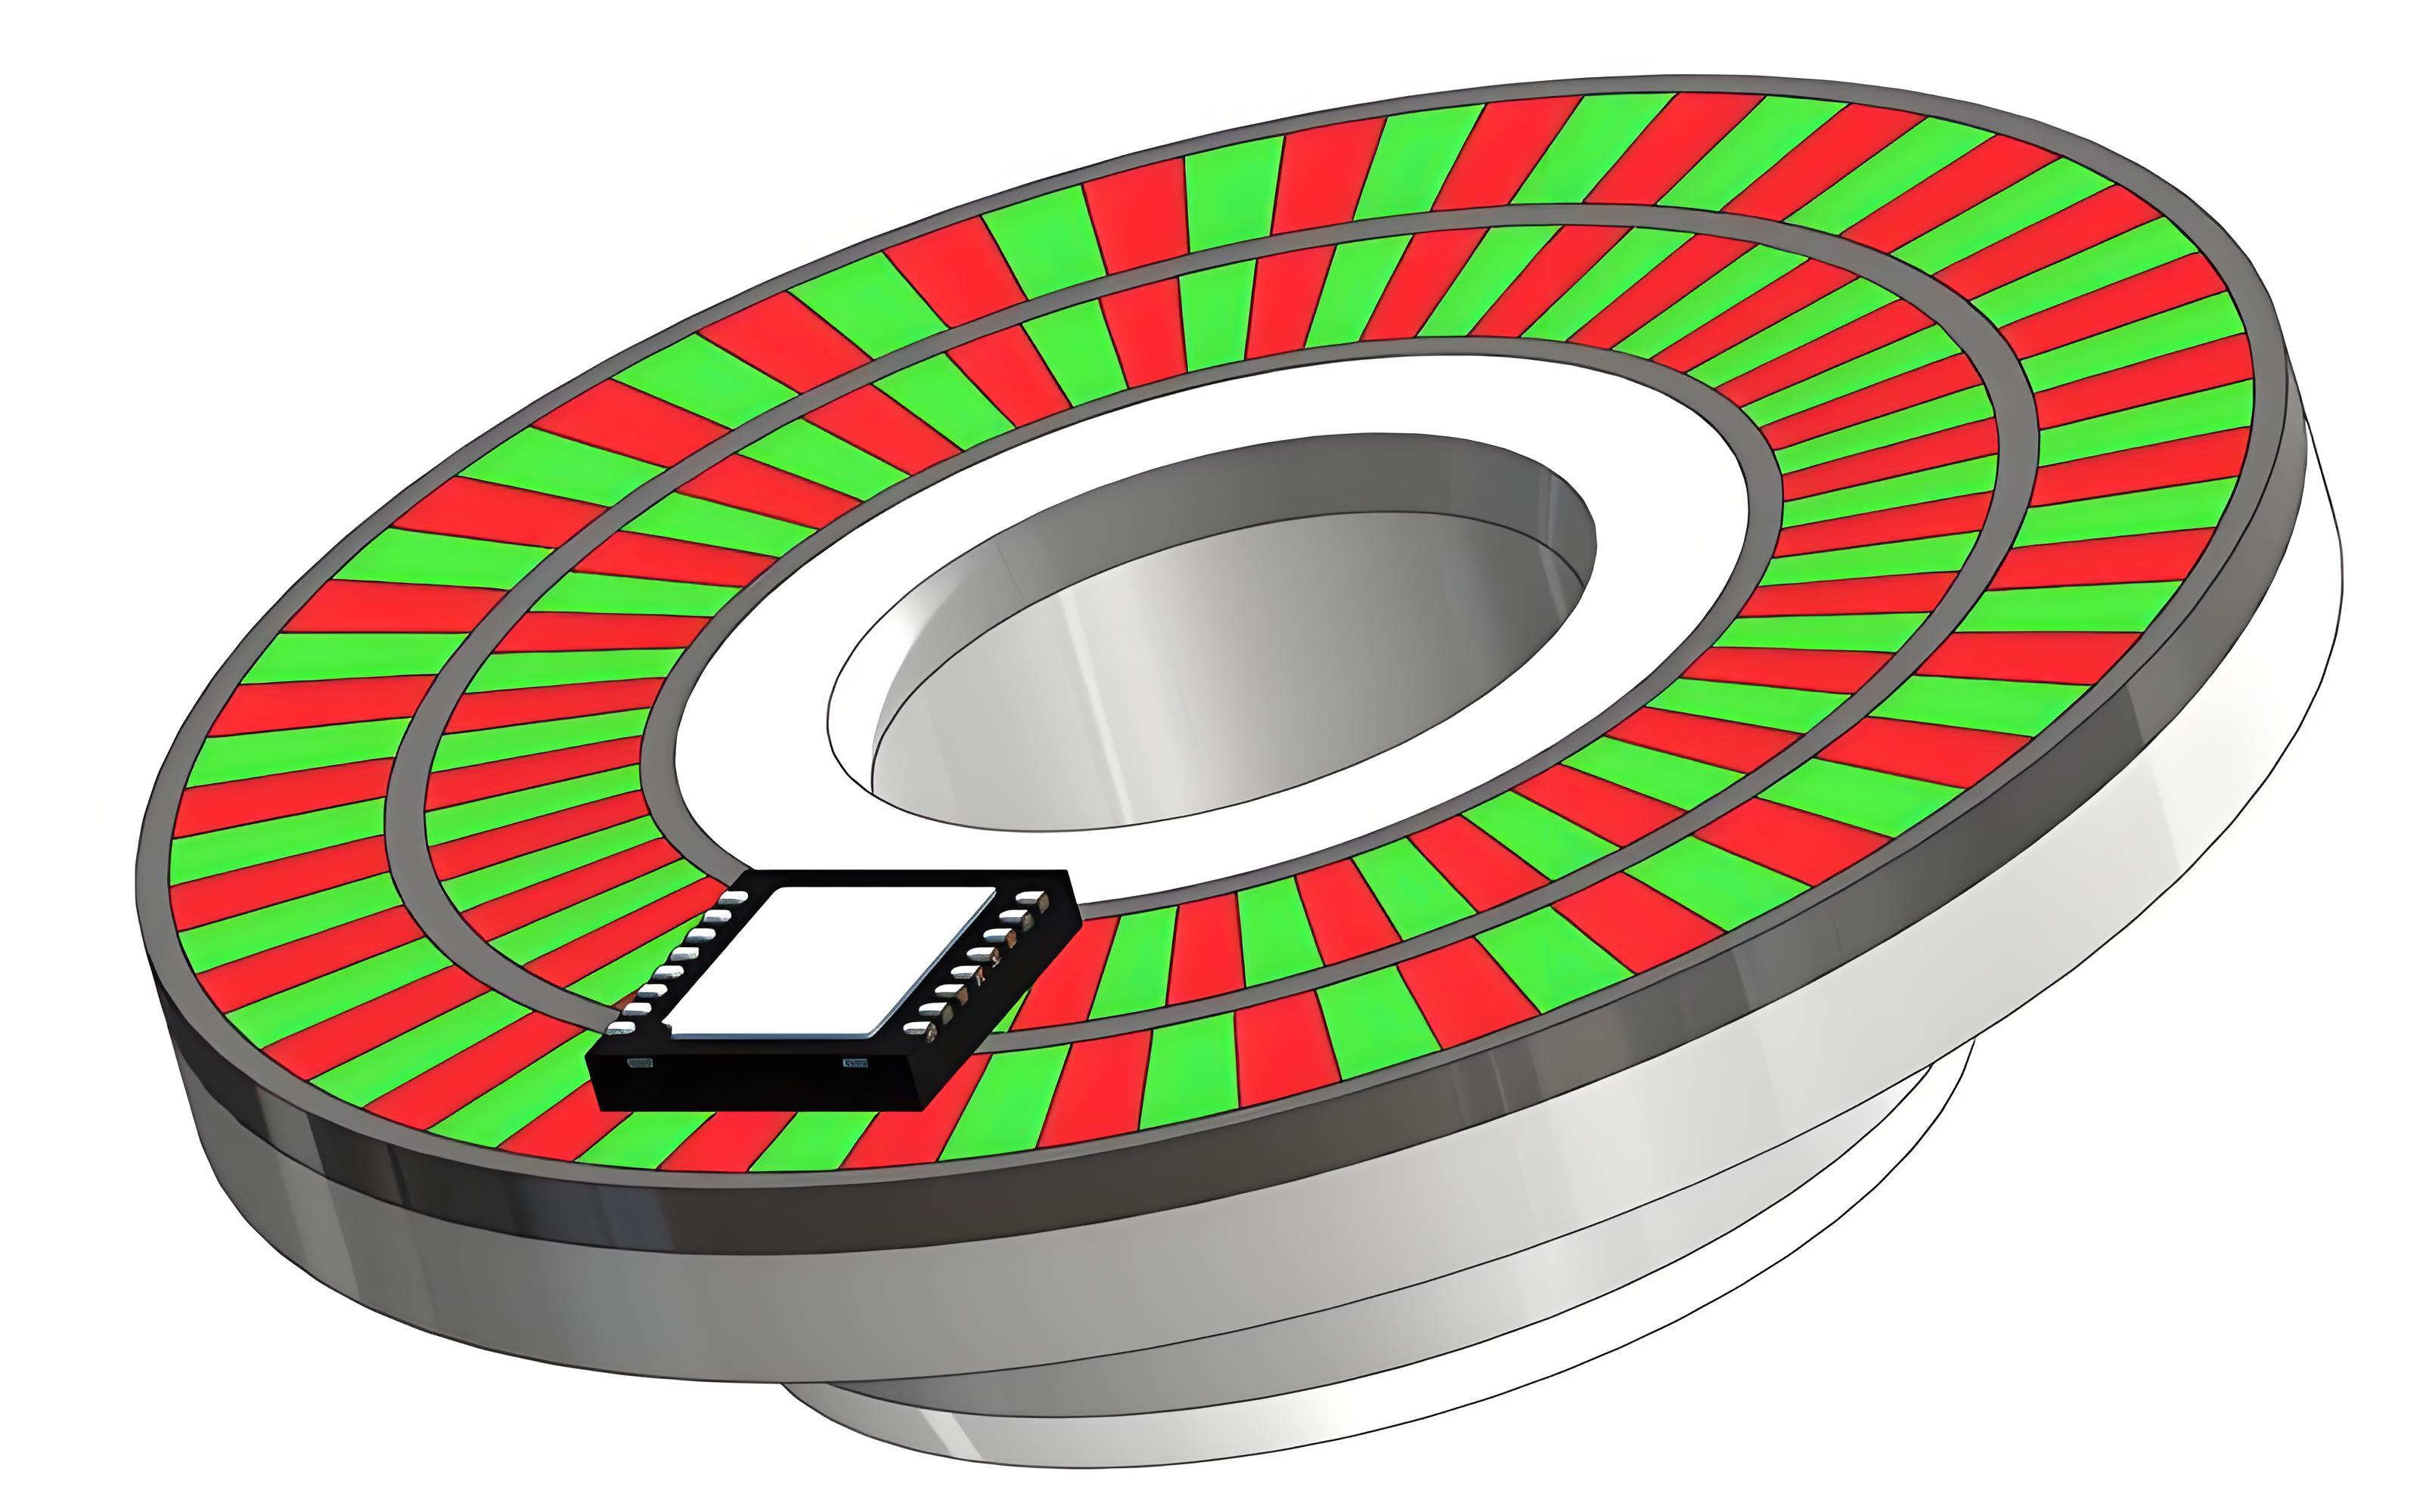  What Is A Sensor Resolver? How Does It Differ From A Magnetic Encoder?